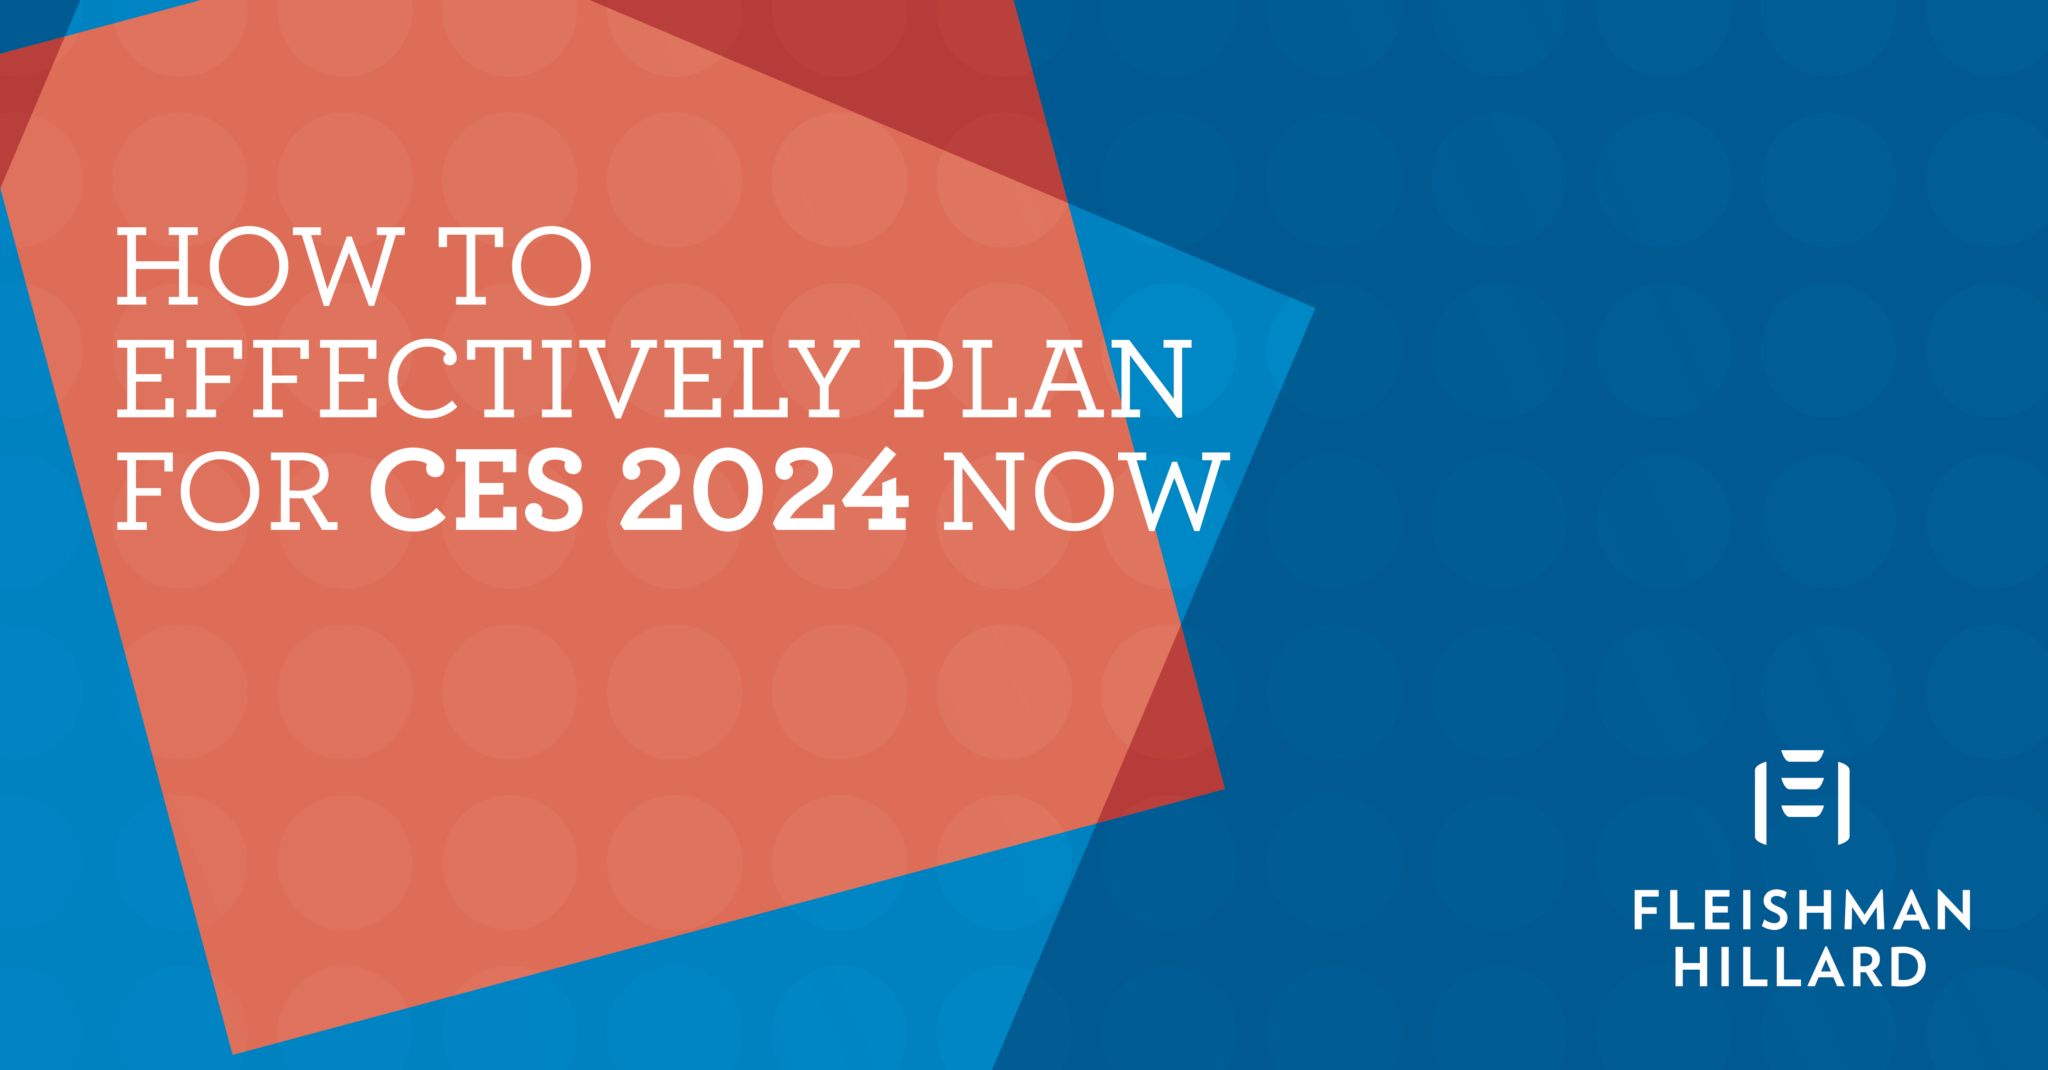 How To Effectively Plan for CES 2024 Now - FleishmanHillard